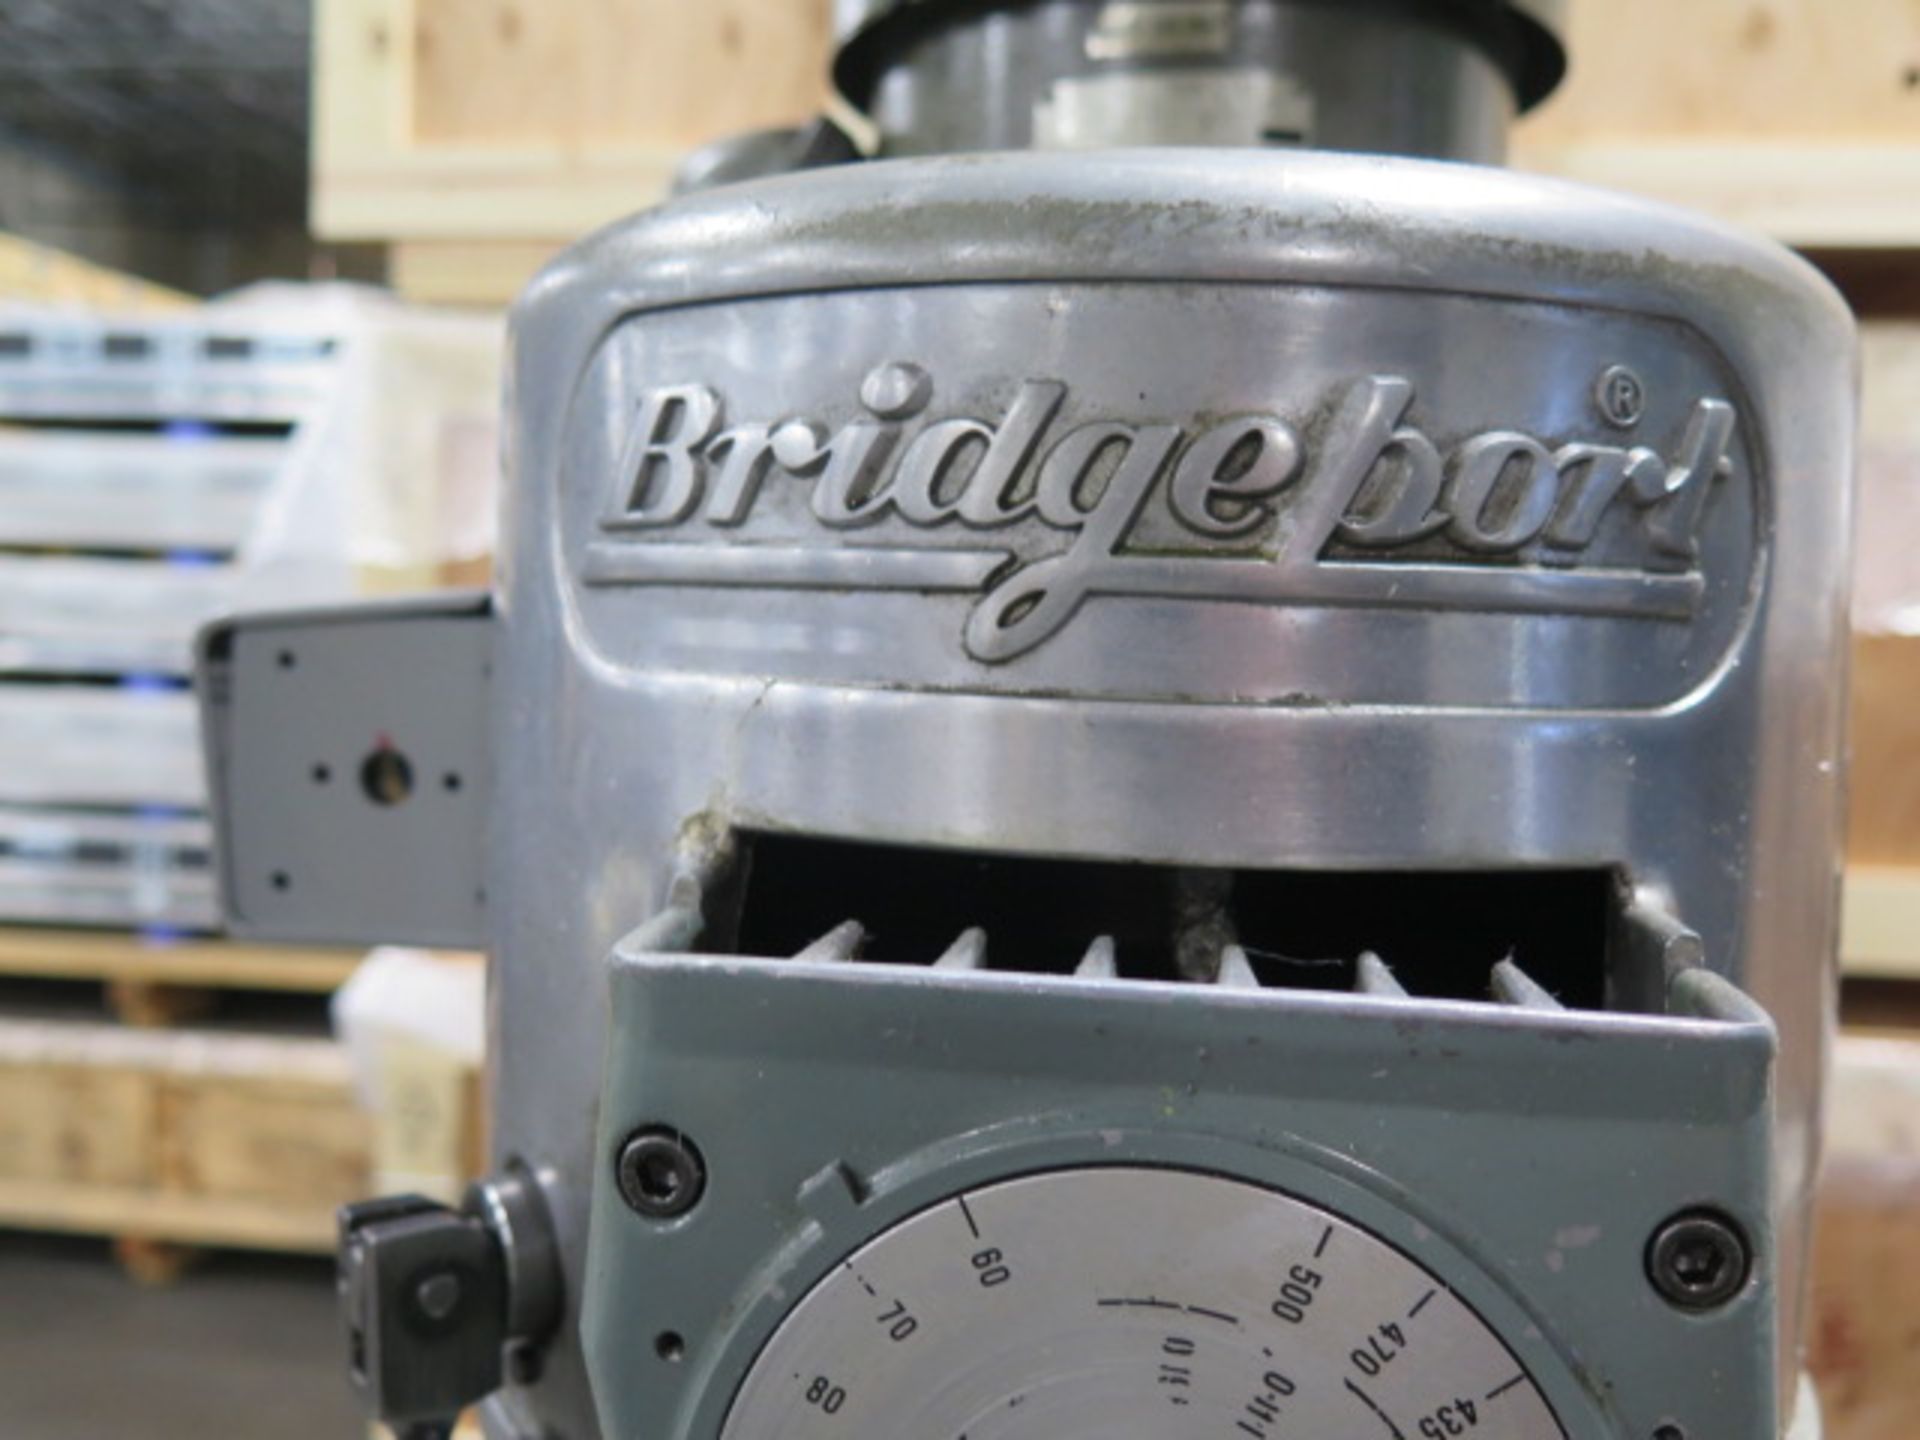 Bridgeport Vertical Mill s/n 176106 w/ 2Hp Motor, 60-4200 Dial Change RPM, Chrome Ways, Power Feed - Image 3 of 11